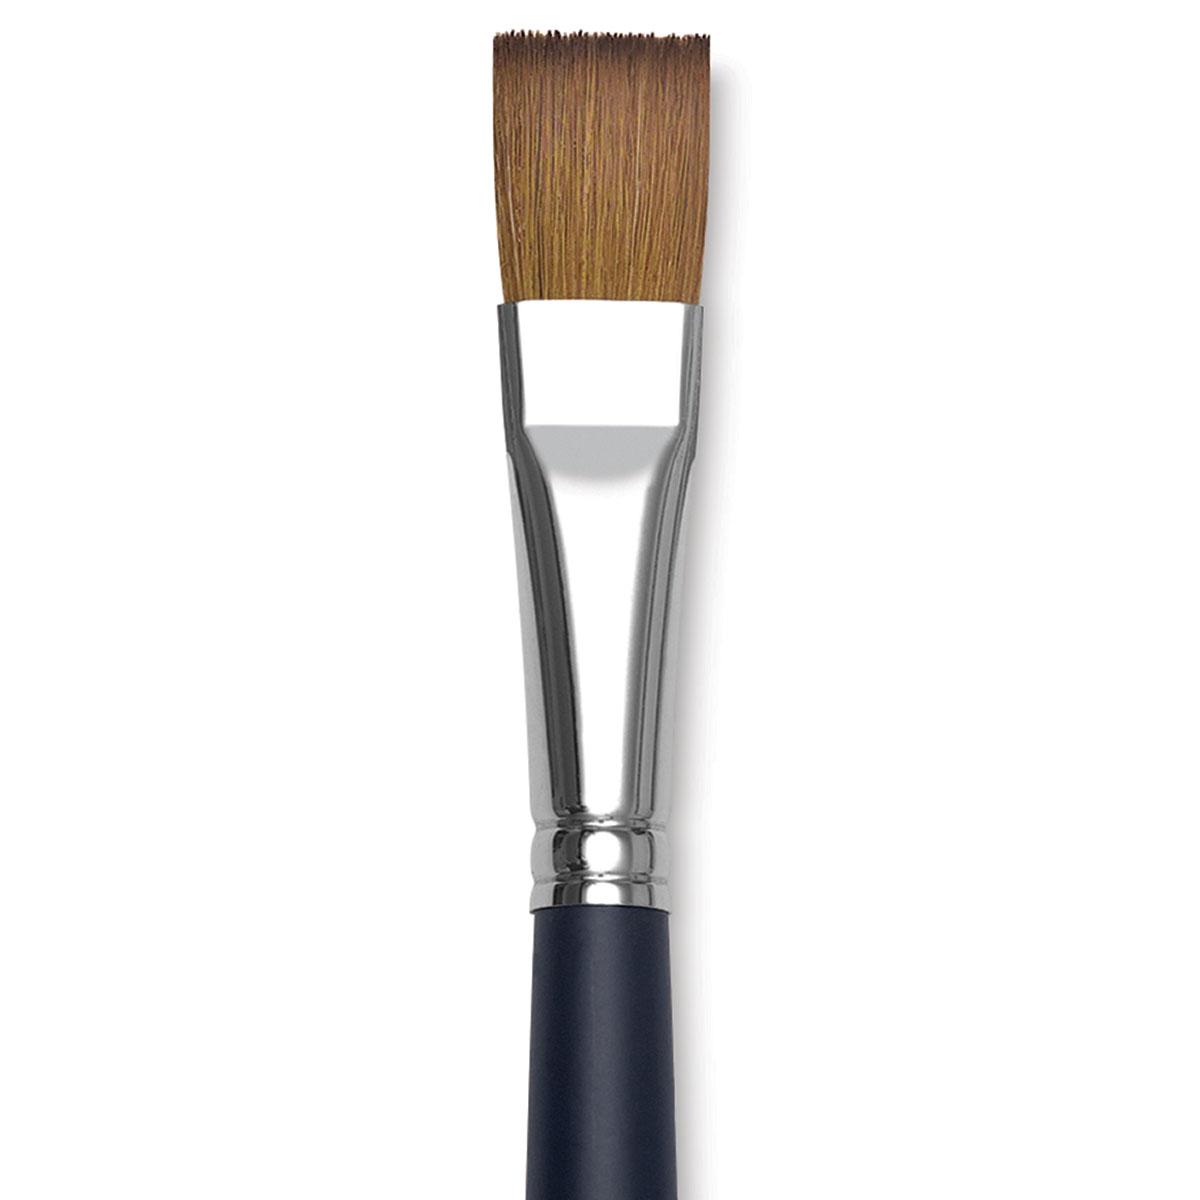 Winsor & Newton Artists' Kolinsky Sable Watercolor Brush - Pointed Round,  Short Handle, Size 4